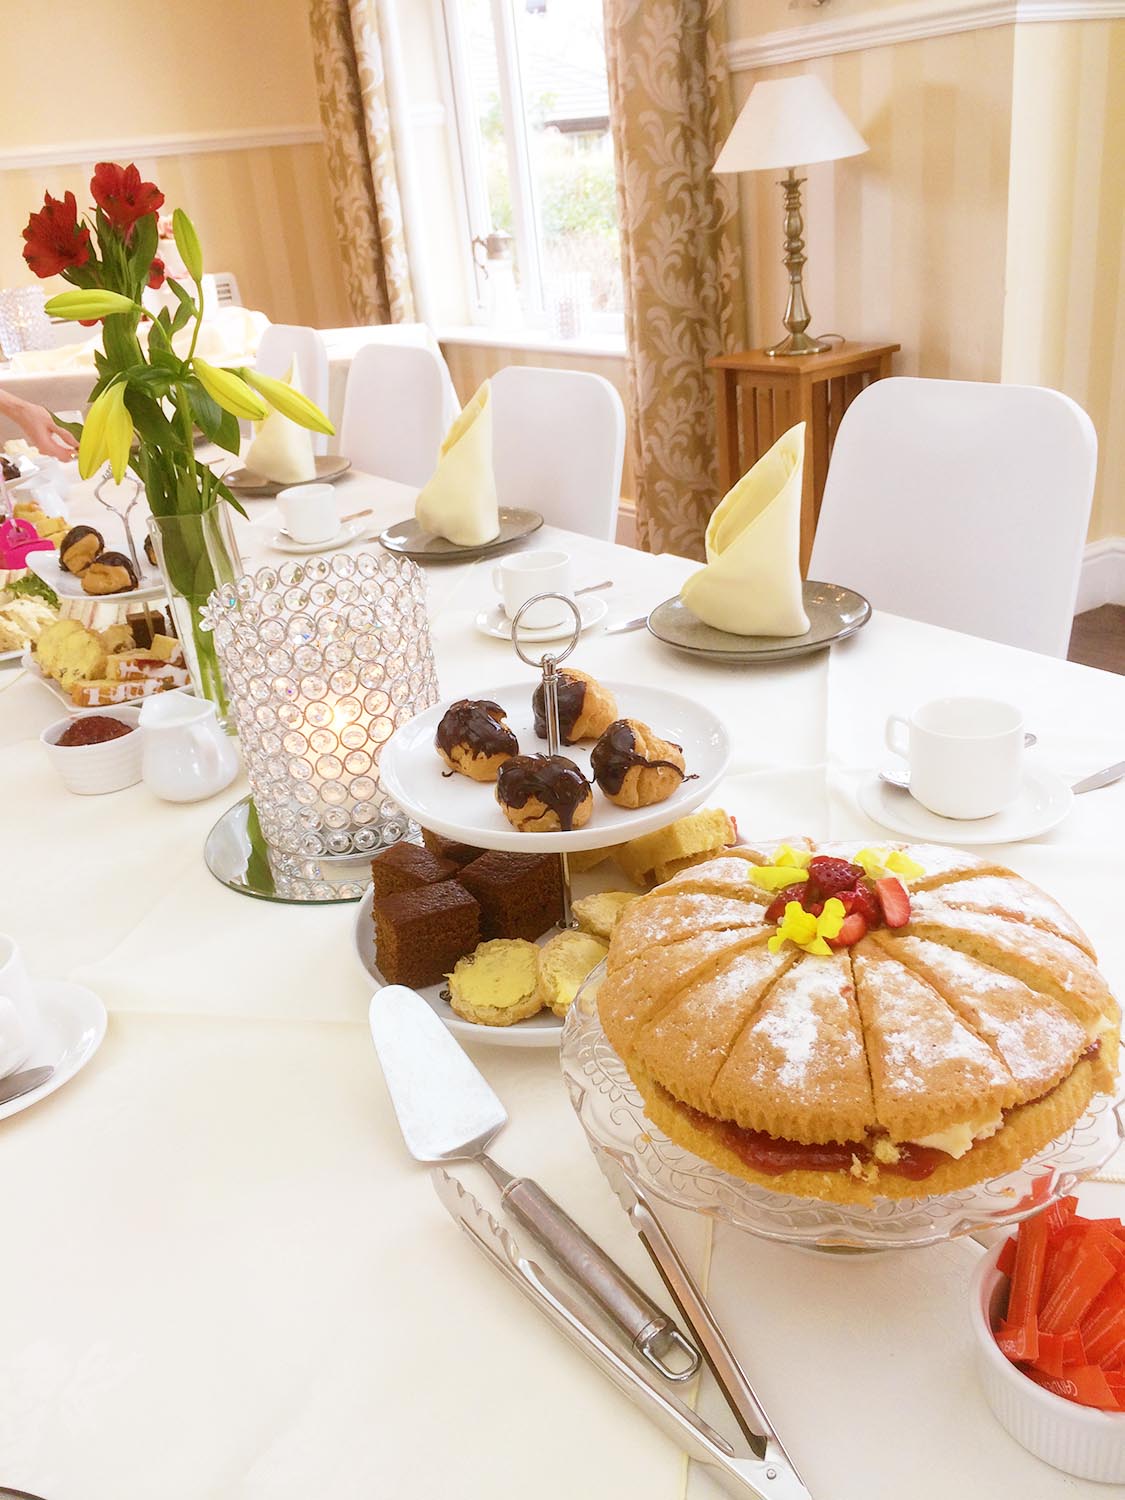 Afternoon tea on table, Weddings, Corporate and Private Hire | The Chetwynde Hotel, Barrow